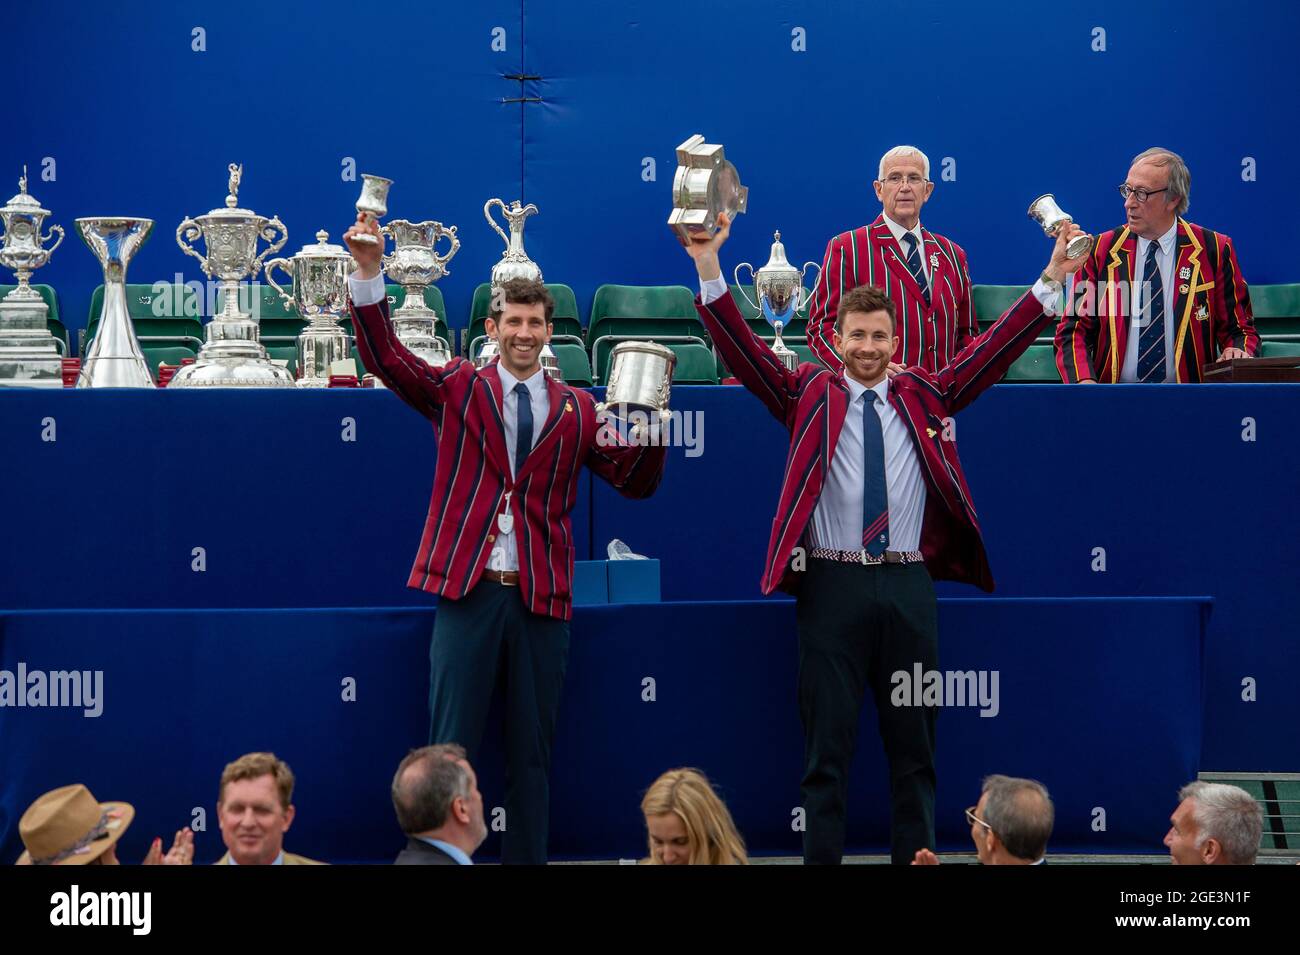 Henley-upon-Thames, Oxfordshire, UK. 15th August, 2021. O.P.W Parish and C.B.A Sullivan winners of the Silver Goblets & Nickalls' Challenge Cup Men's Pair Oars on Finals Day at Henley Royal Regatta 2021. Credit: Maureen McLean/Alamy Stock Photo